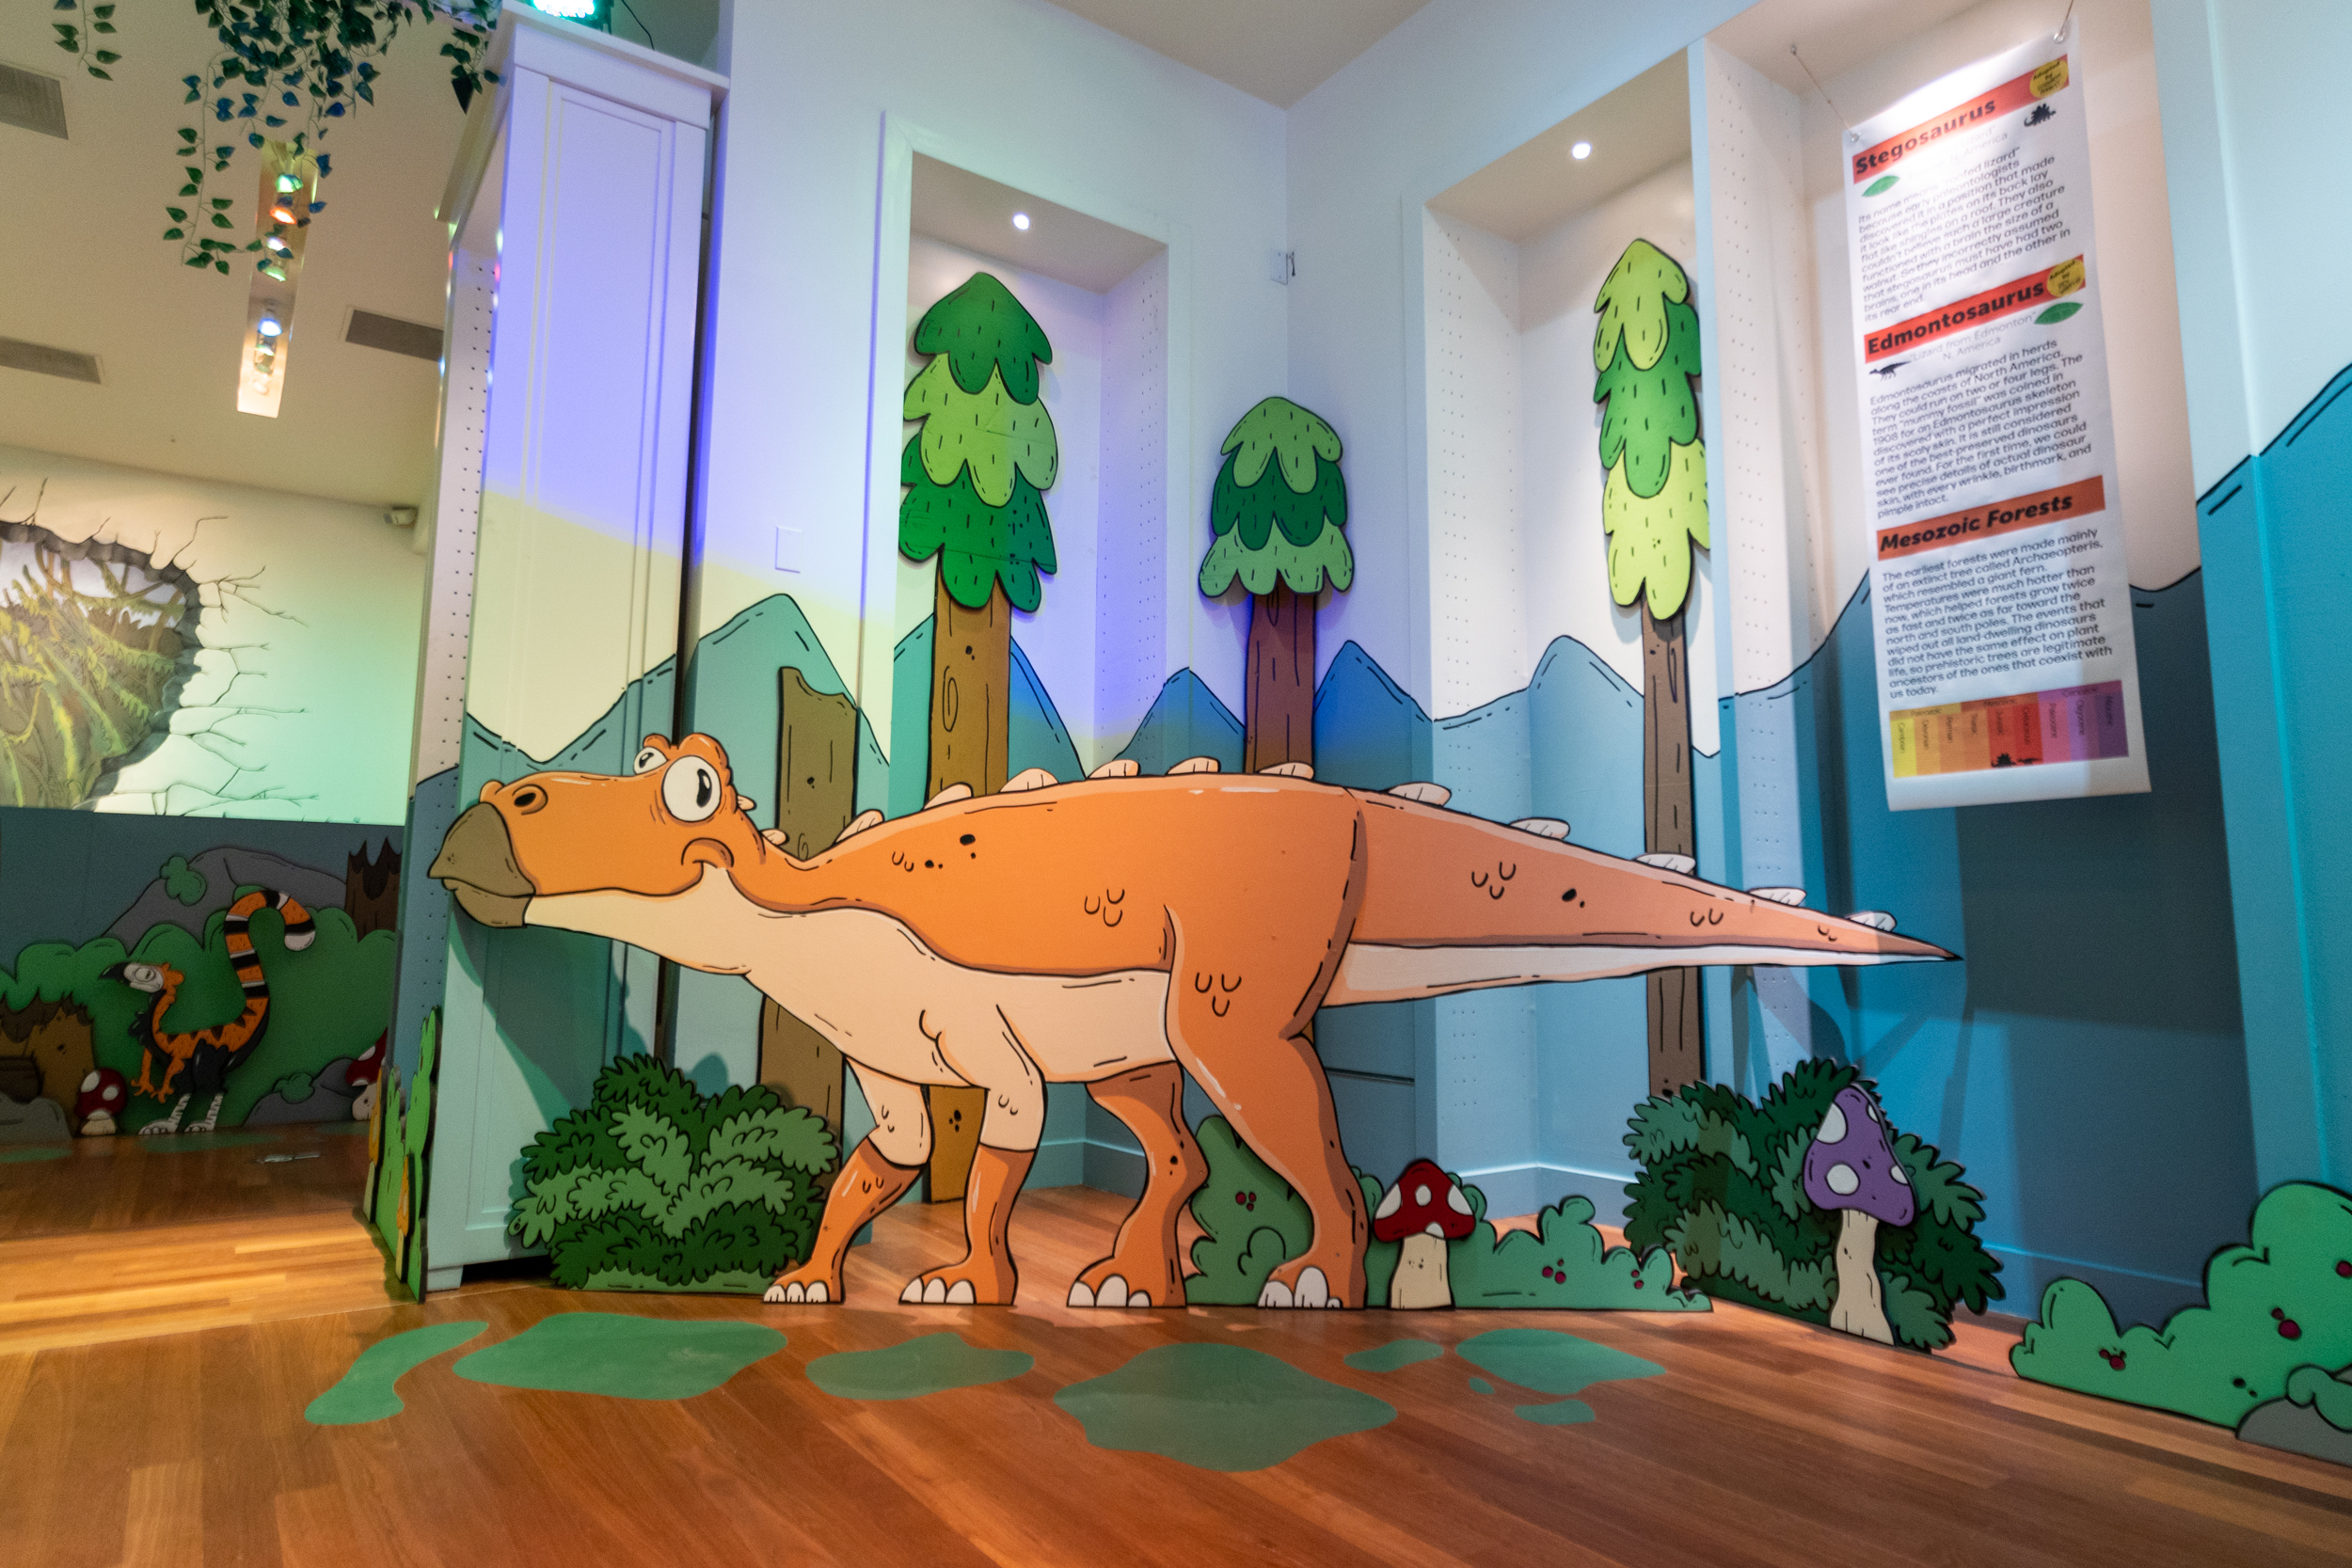 Portland artist Mike Bennett loves dinosaurs. He thinks you'll love them  too after visiting his pop-up museum, Dinolandia. - OPB